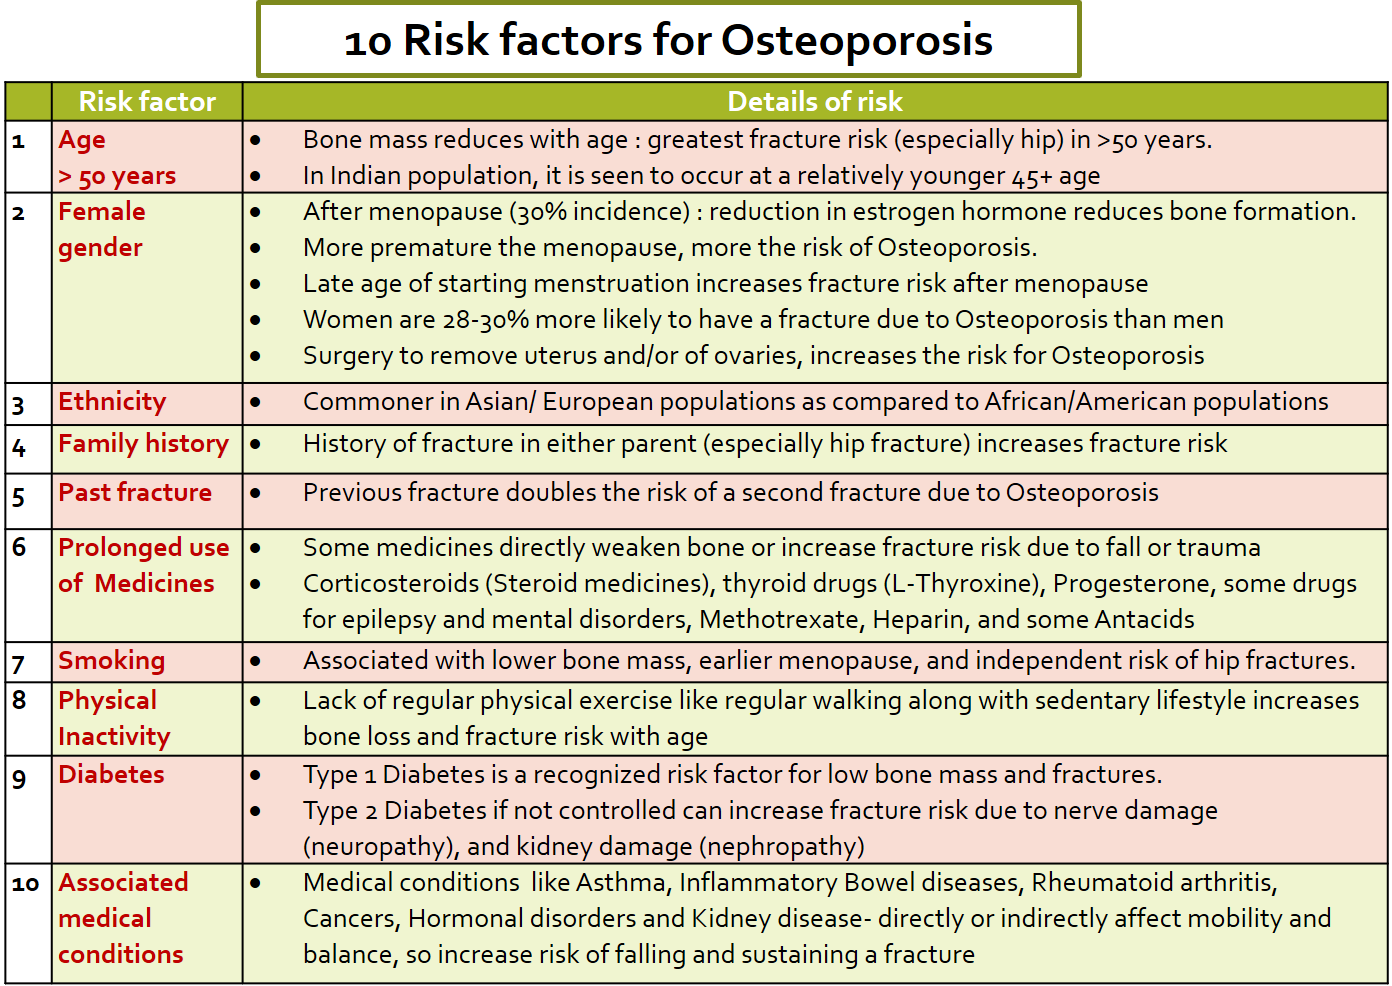 Risk factors for Osteoporosis